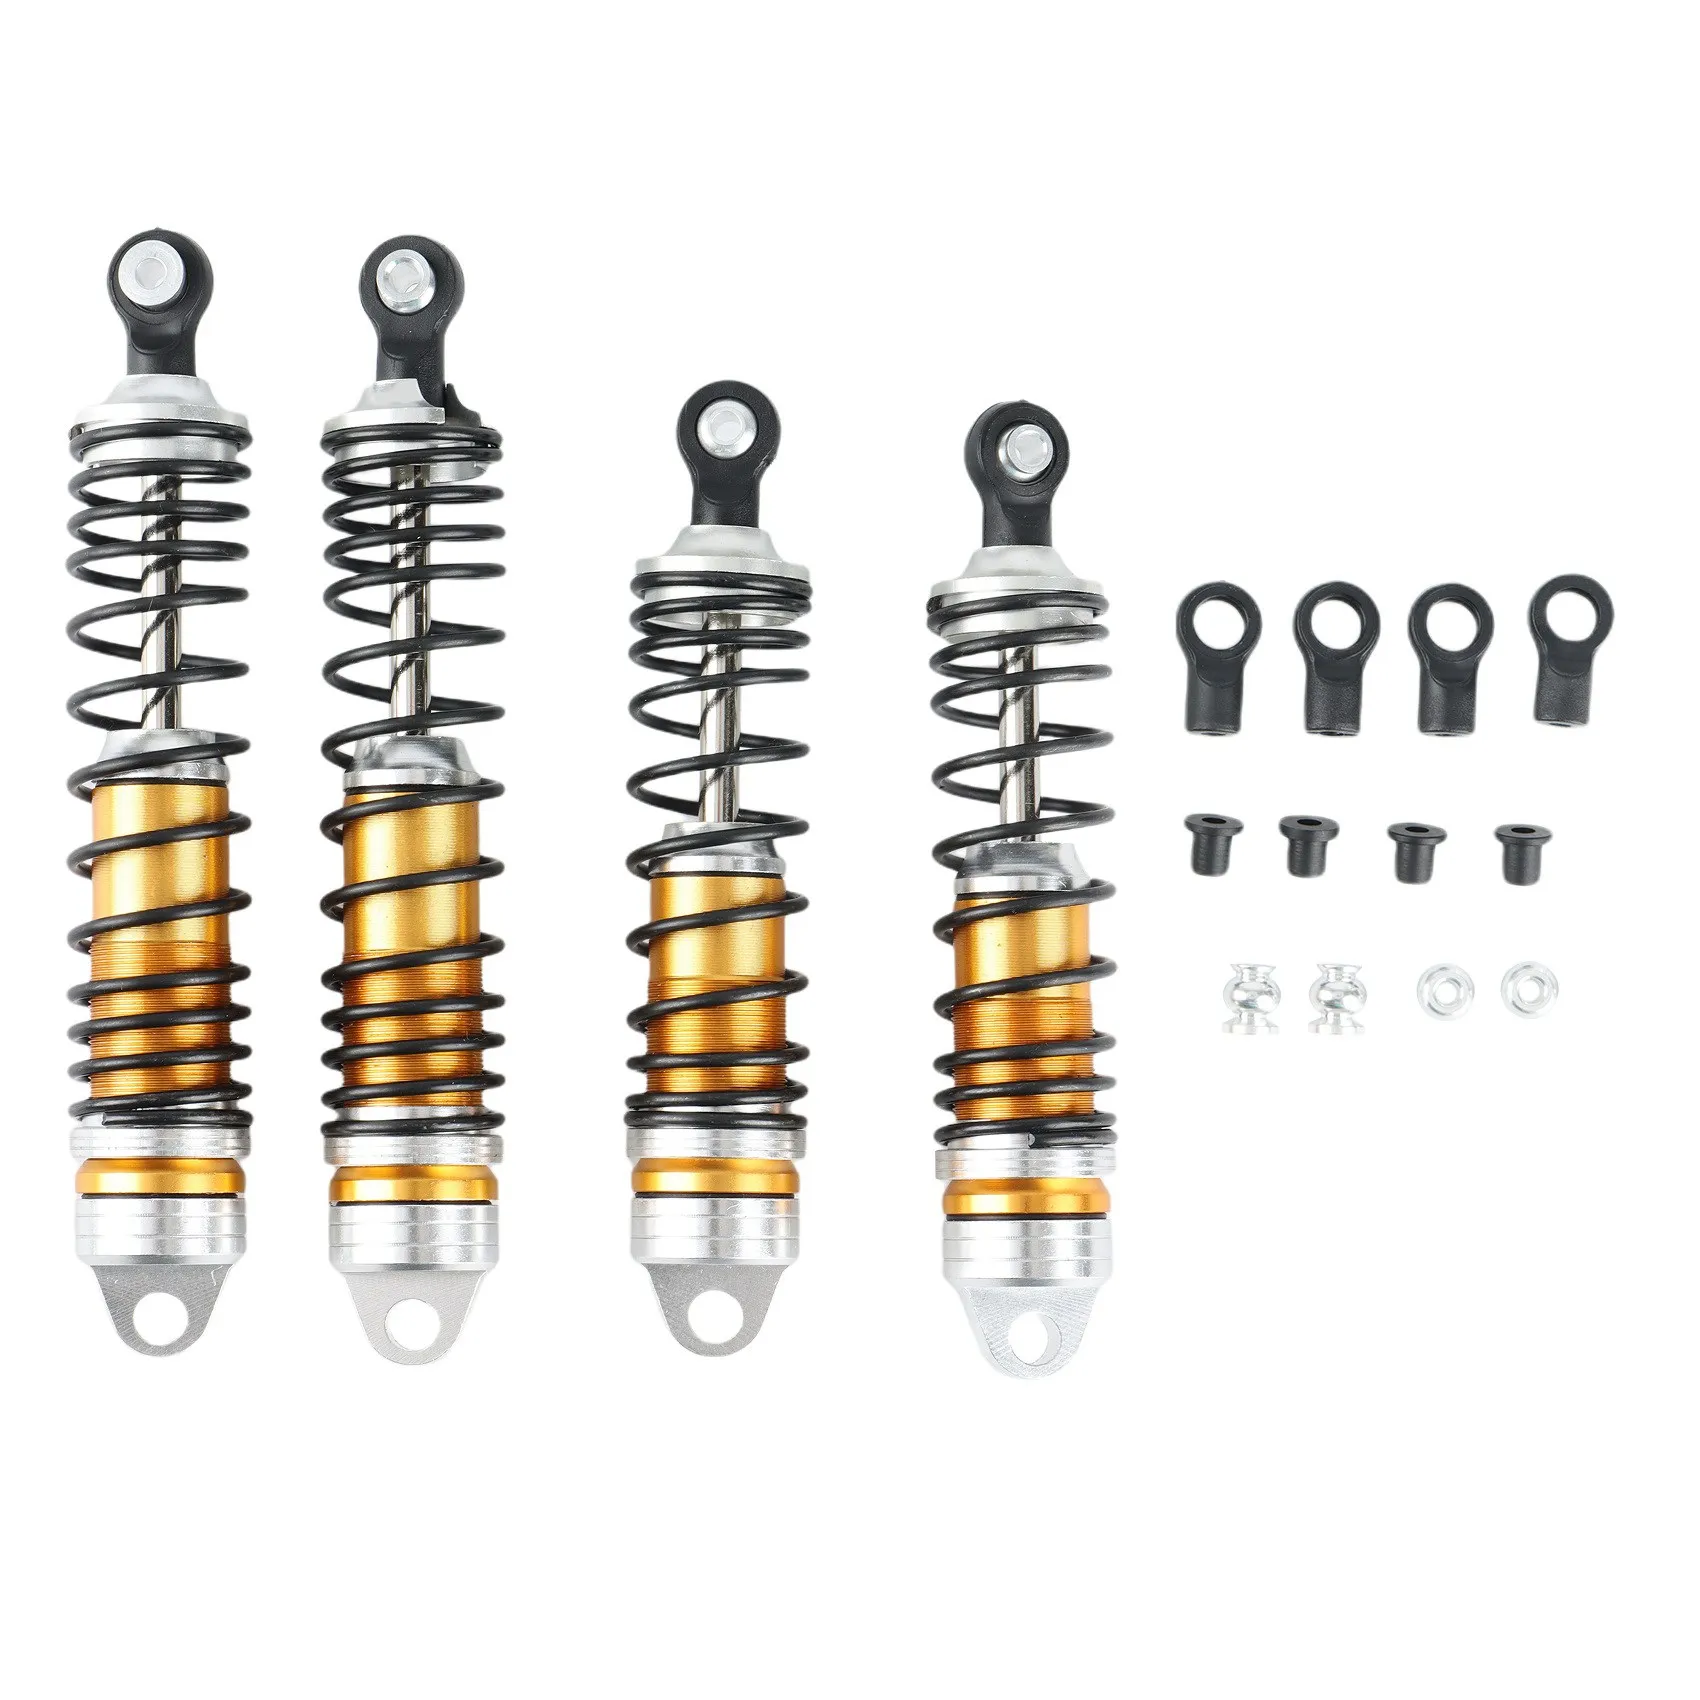 

4Pcs Metal Front & Rear Shock Absorbers for Traxxas Slash 4X4 4WD 2WD Rustler Stampede Hoss 1/10 RC Car Upgrade Parts,3